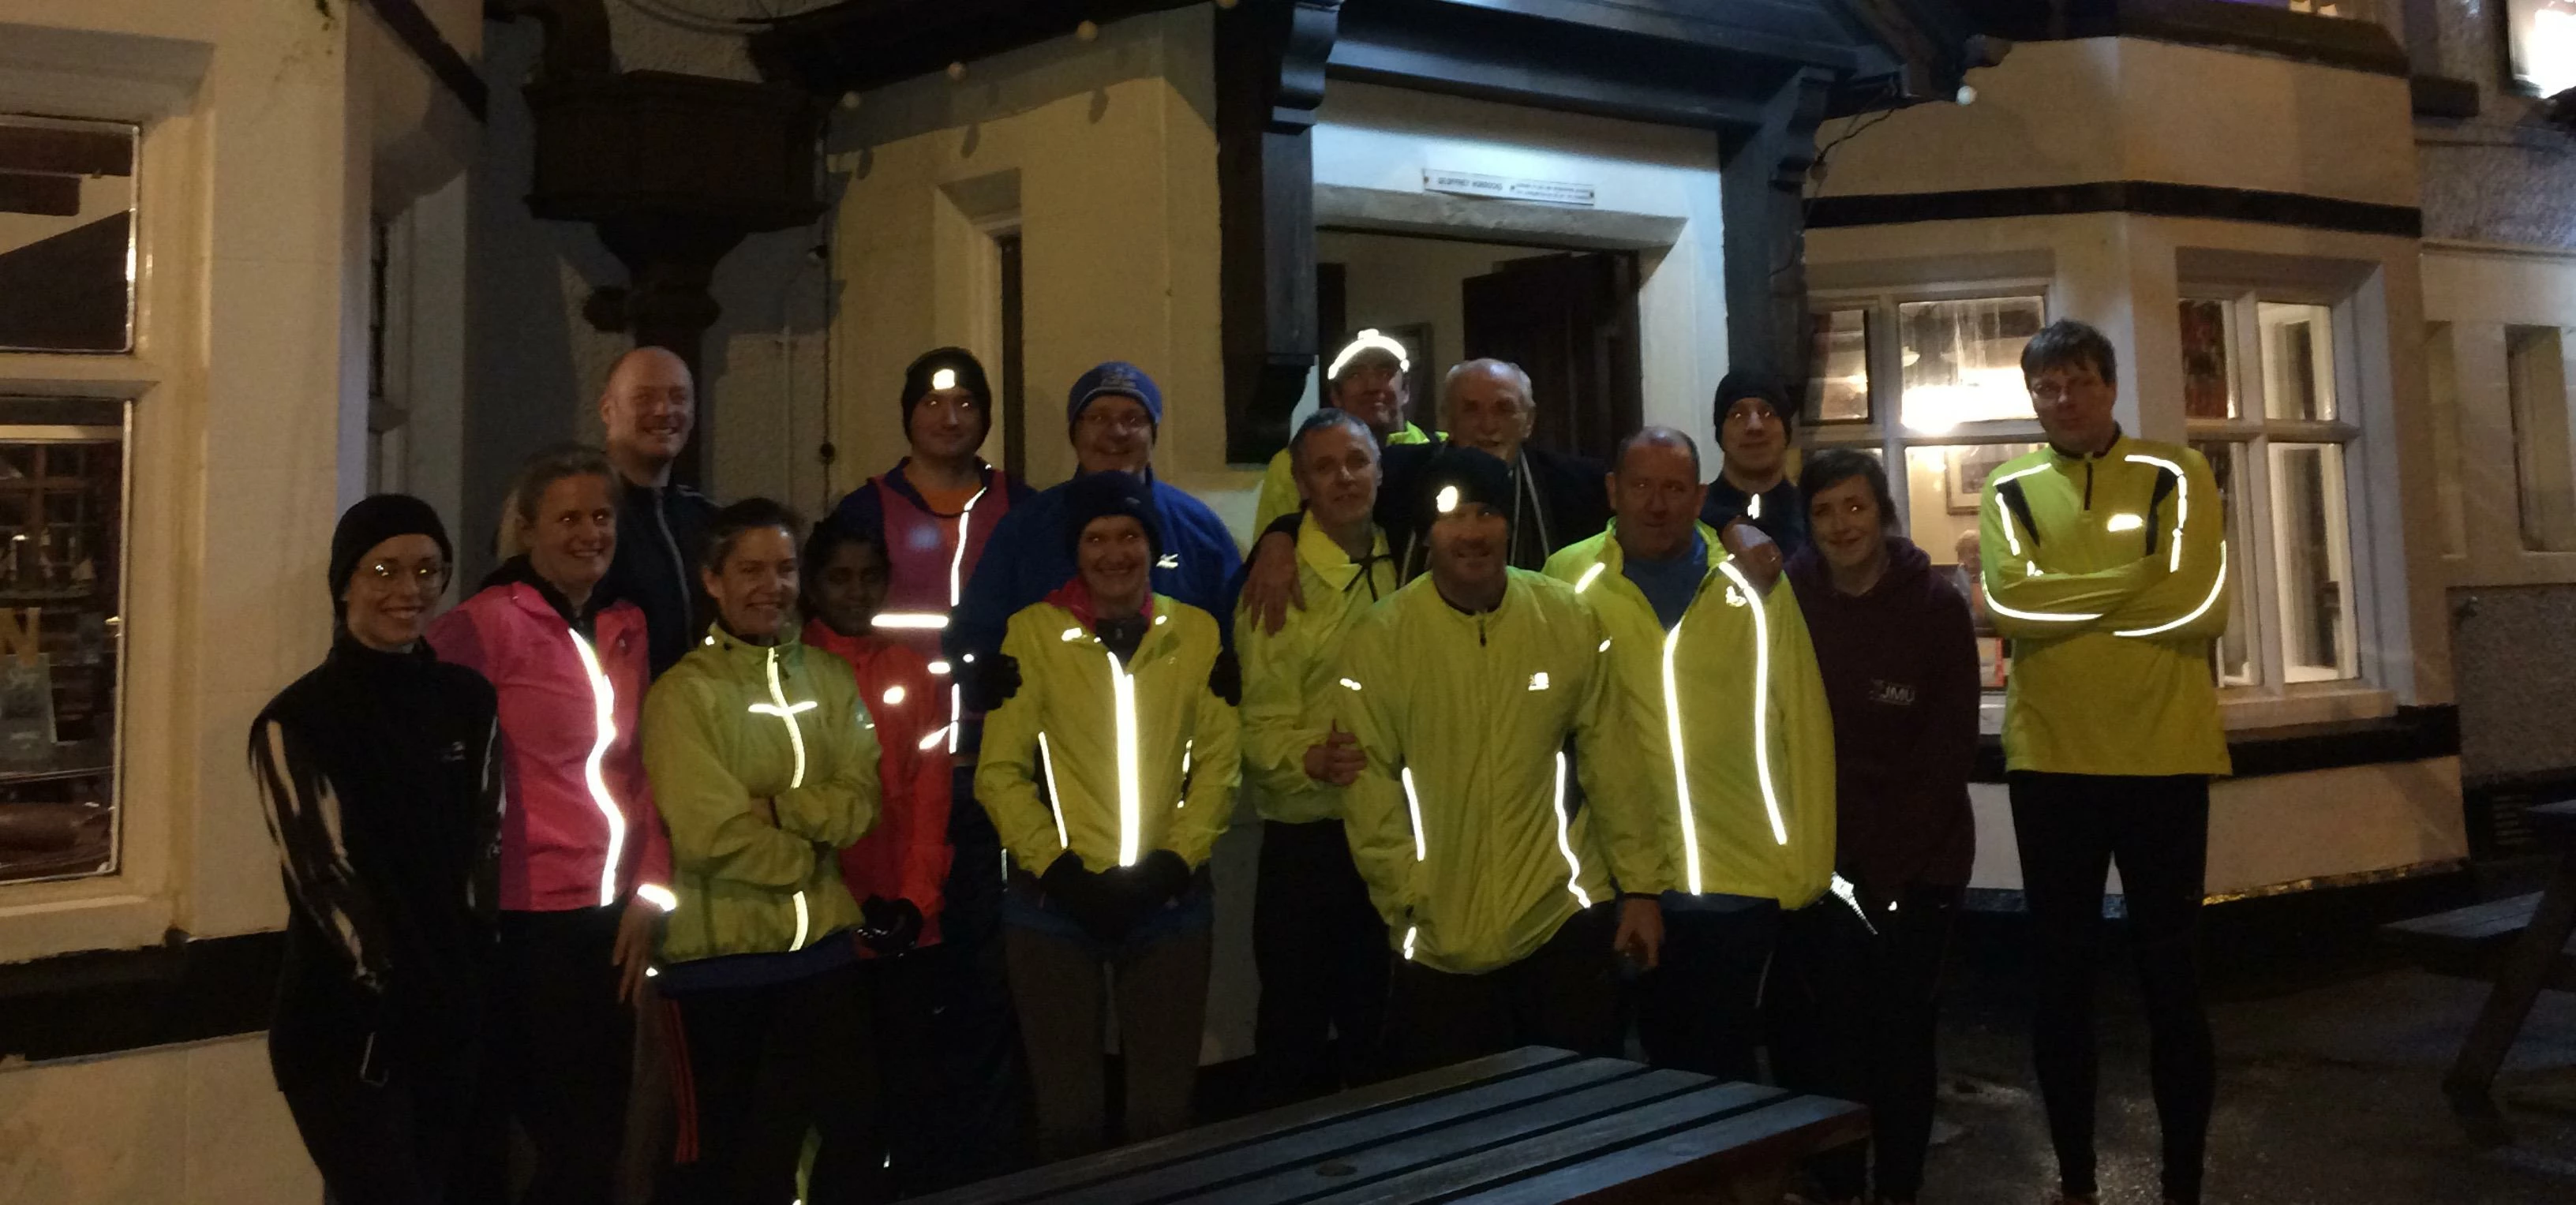 The Ship Inn Striders all set to sail on their new running journey